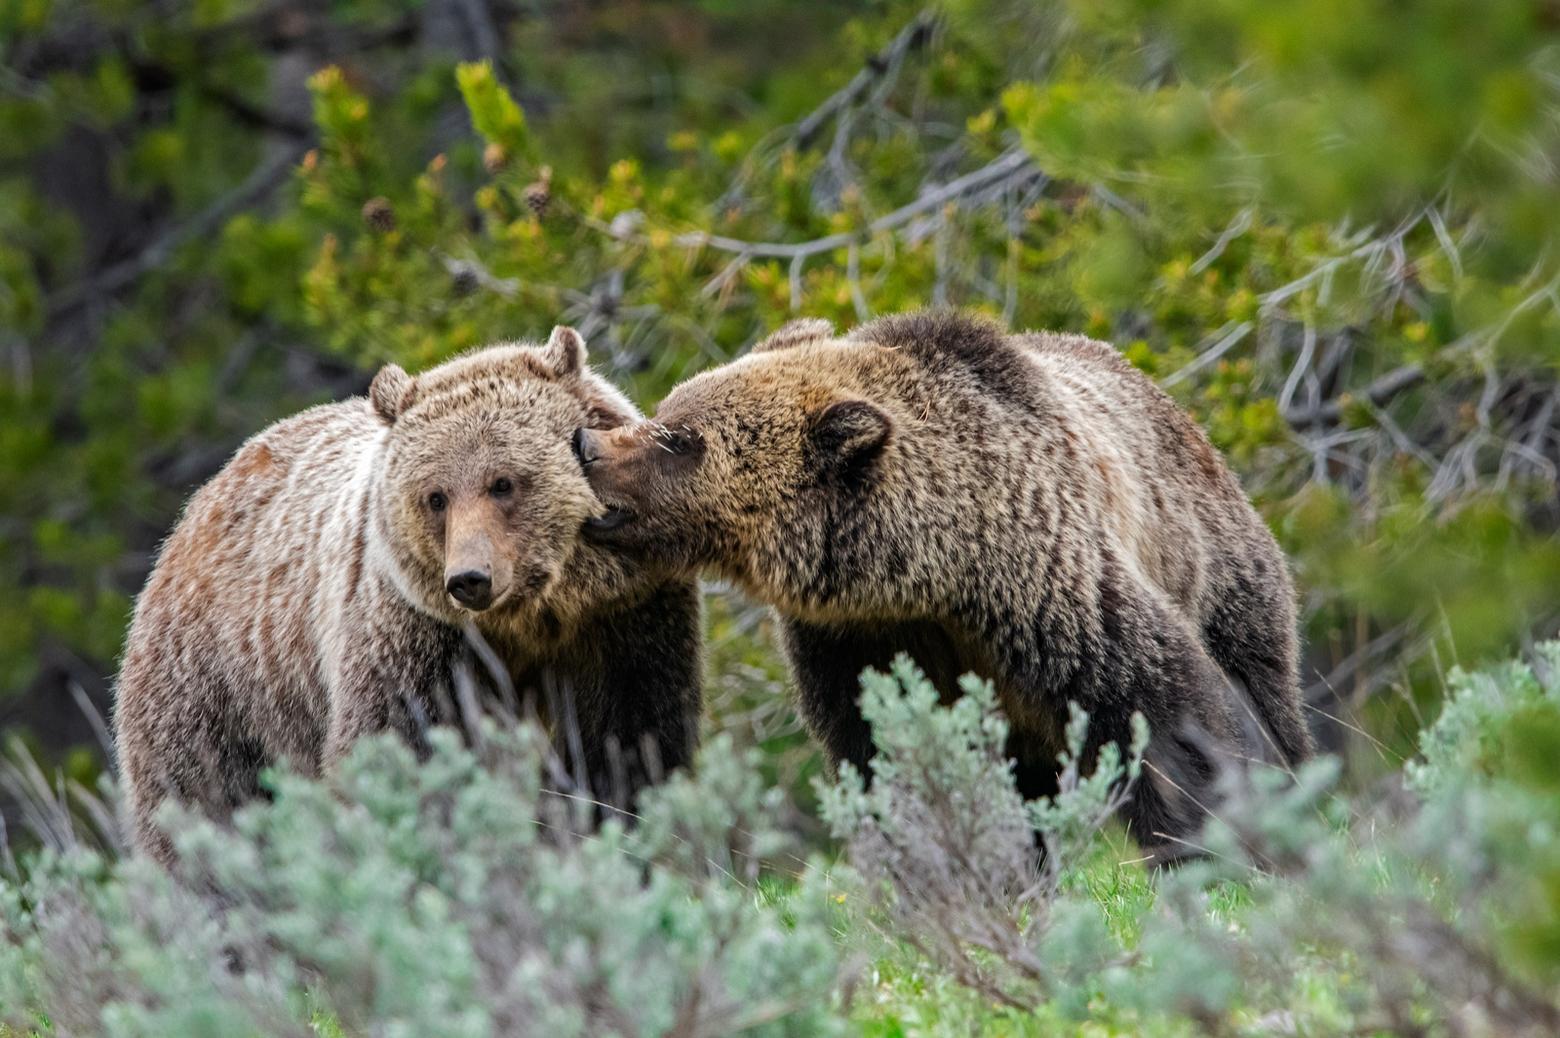 Controversial bills moving through the 2021 Montana legislature would allow grizzlies to be killed outside the recovery zone based on the mere claim they were threatening livestock or human safety. They would prohibit bears outside the recovery zone from being relocated, and would allow black bears to be hunted with hounds, likely causing conflicts with grizzlies. Other bills have negative implications for grizzlies too. Experts say, if passed, they will reverse 40 years of bear conservation and likely reduce the possibility of bear populations from Greater Yellowstone linking up with bear populations in the northern part of the state. This photo, titled "Blondie's Legacy" is by Thomas D. Mangelsen (mangelsen.com)